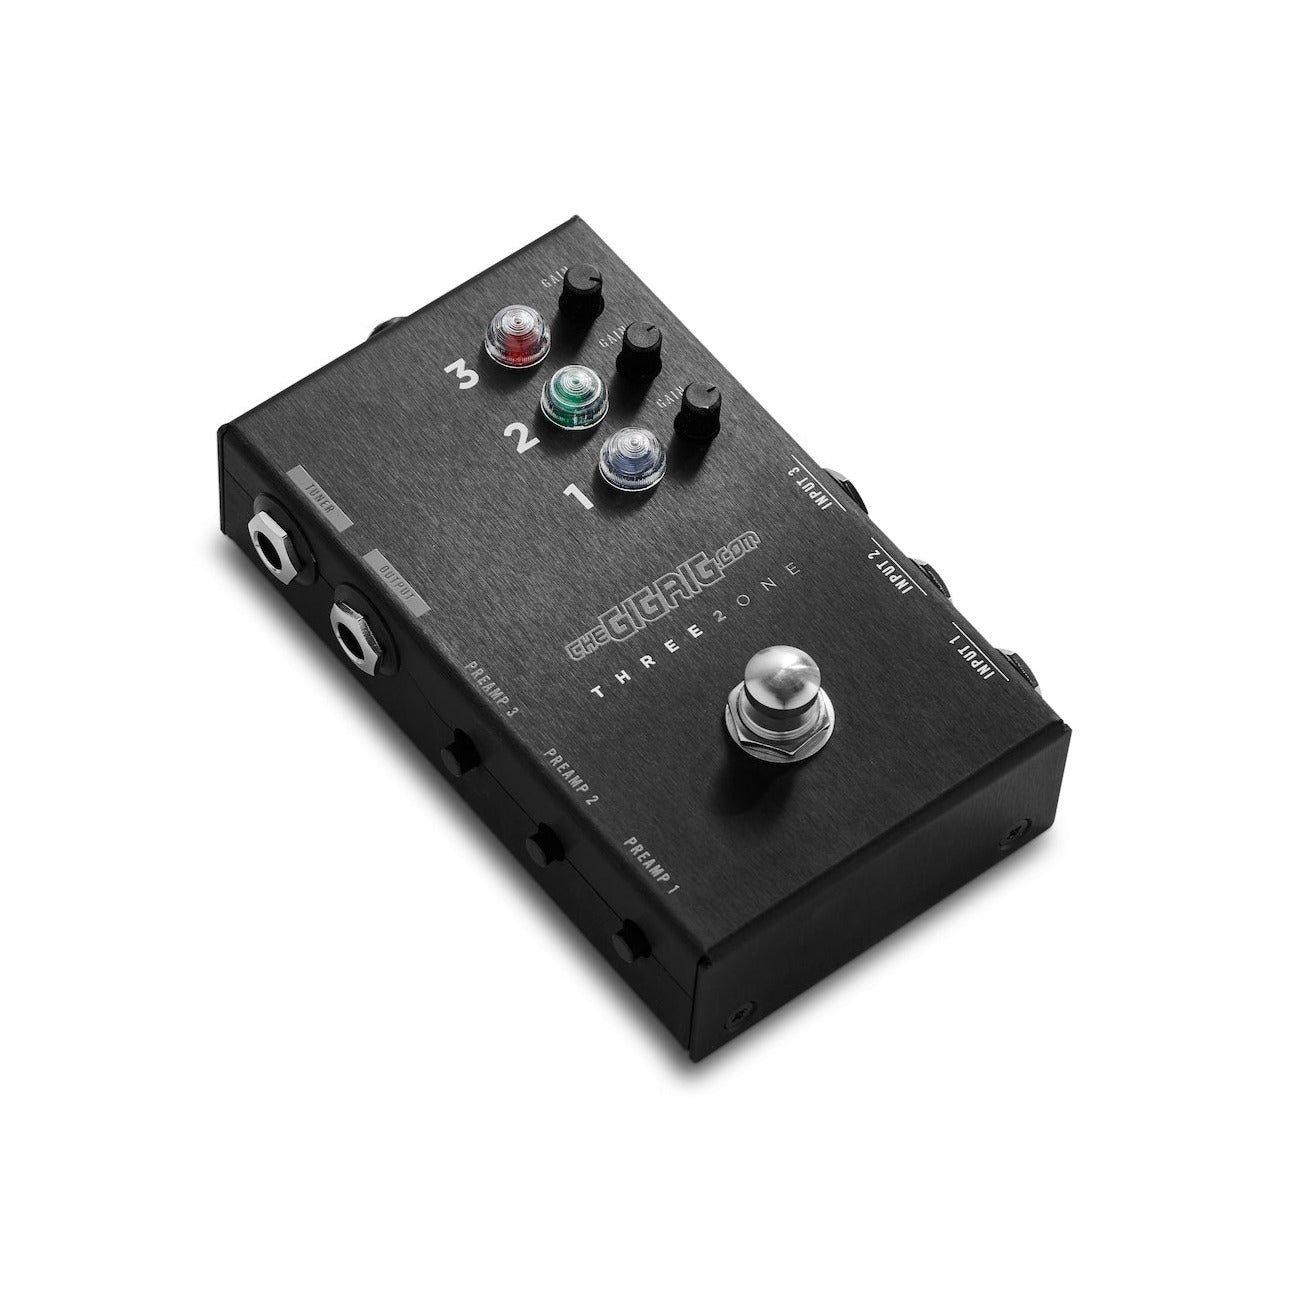 The GigRig Three2One Guitar Switcher